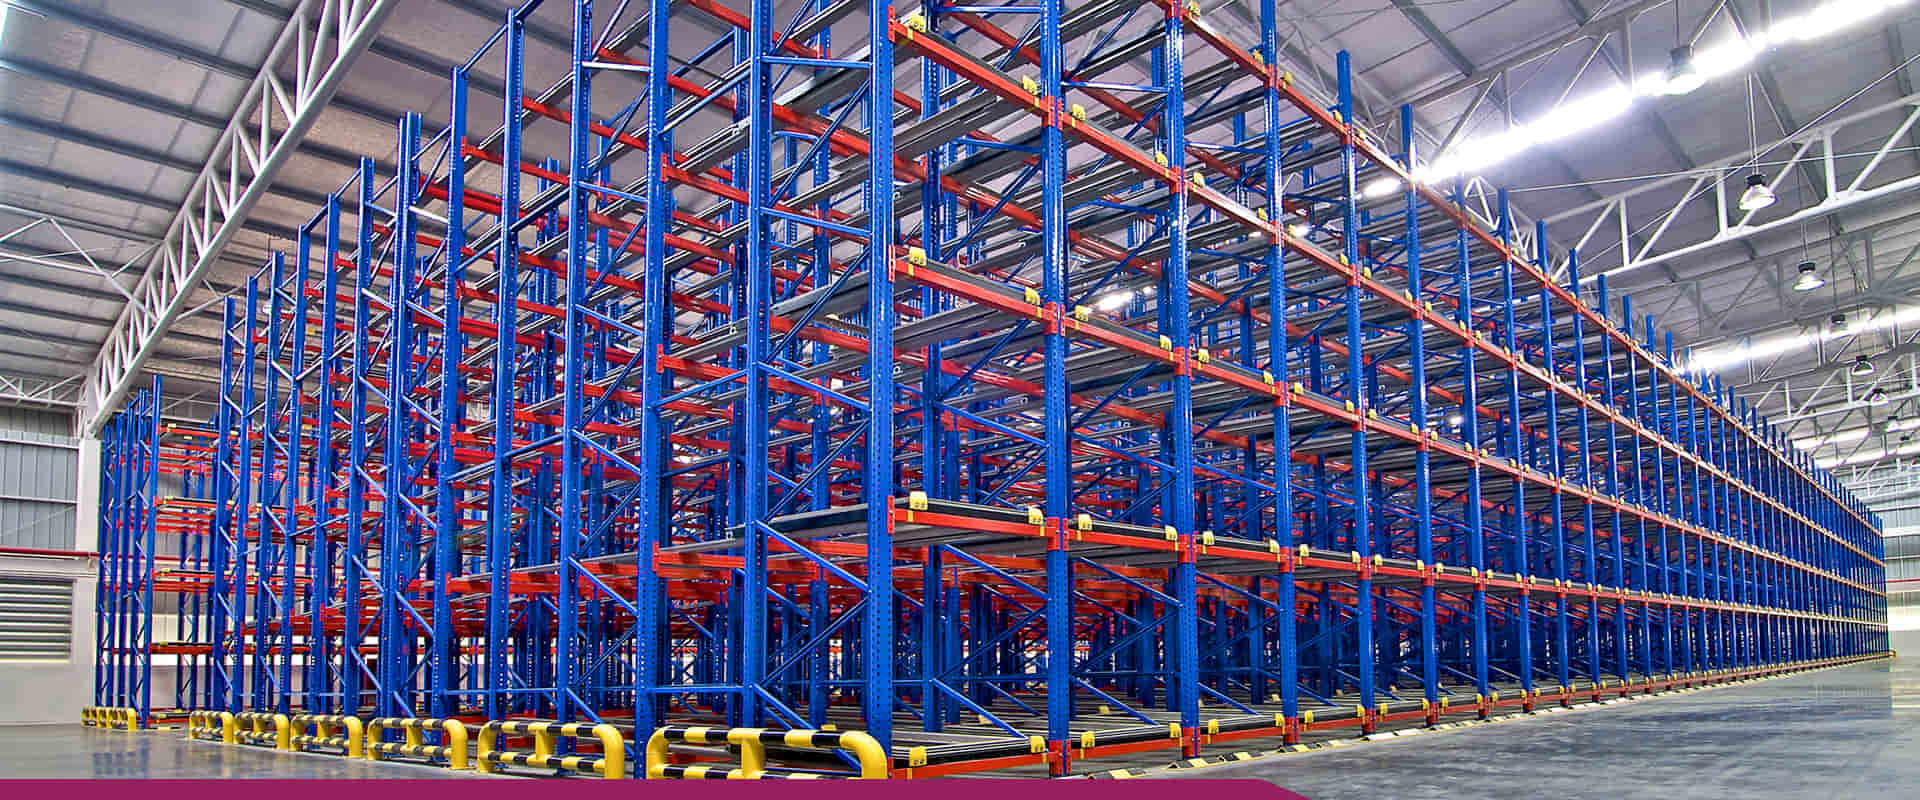 India’s Top Warehouse And Industrial Storage Racks Manufacturer In Shahjahanpur